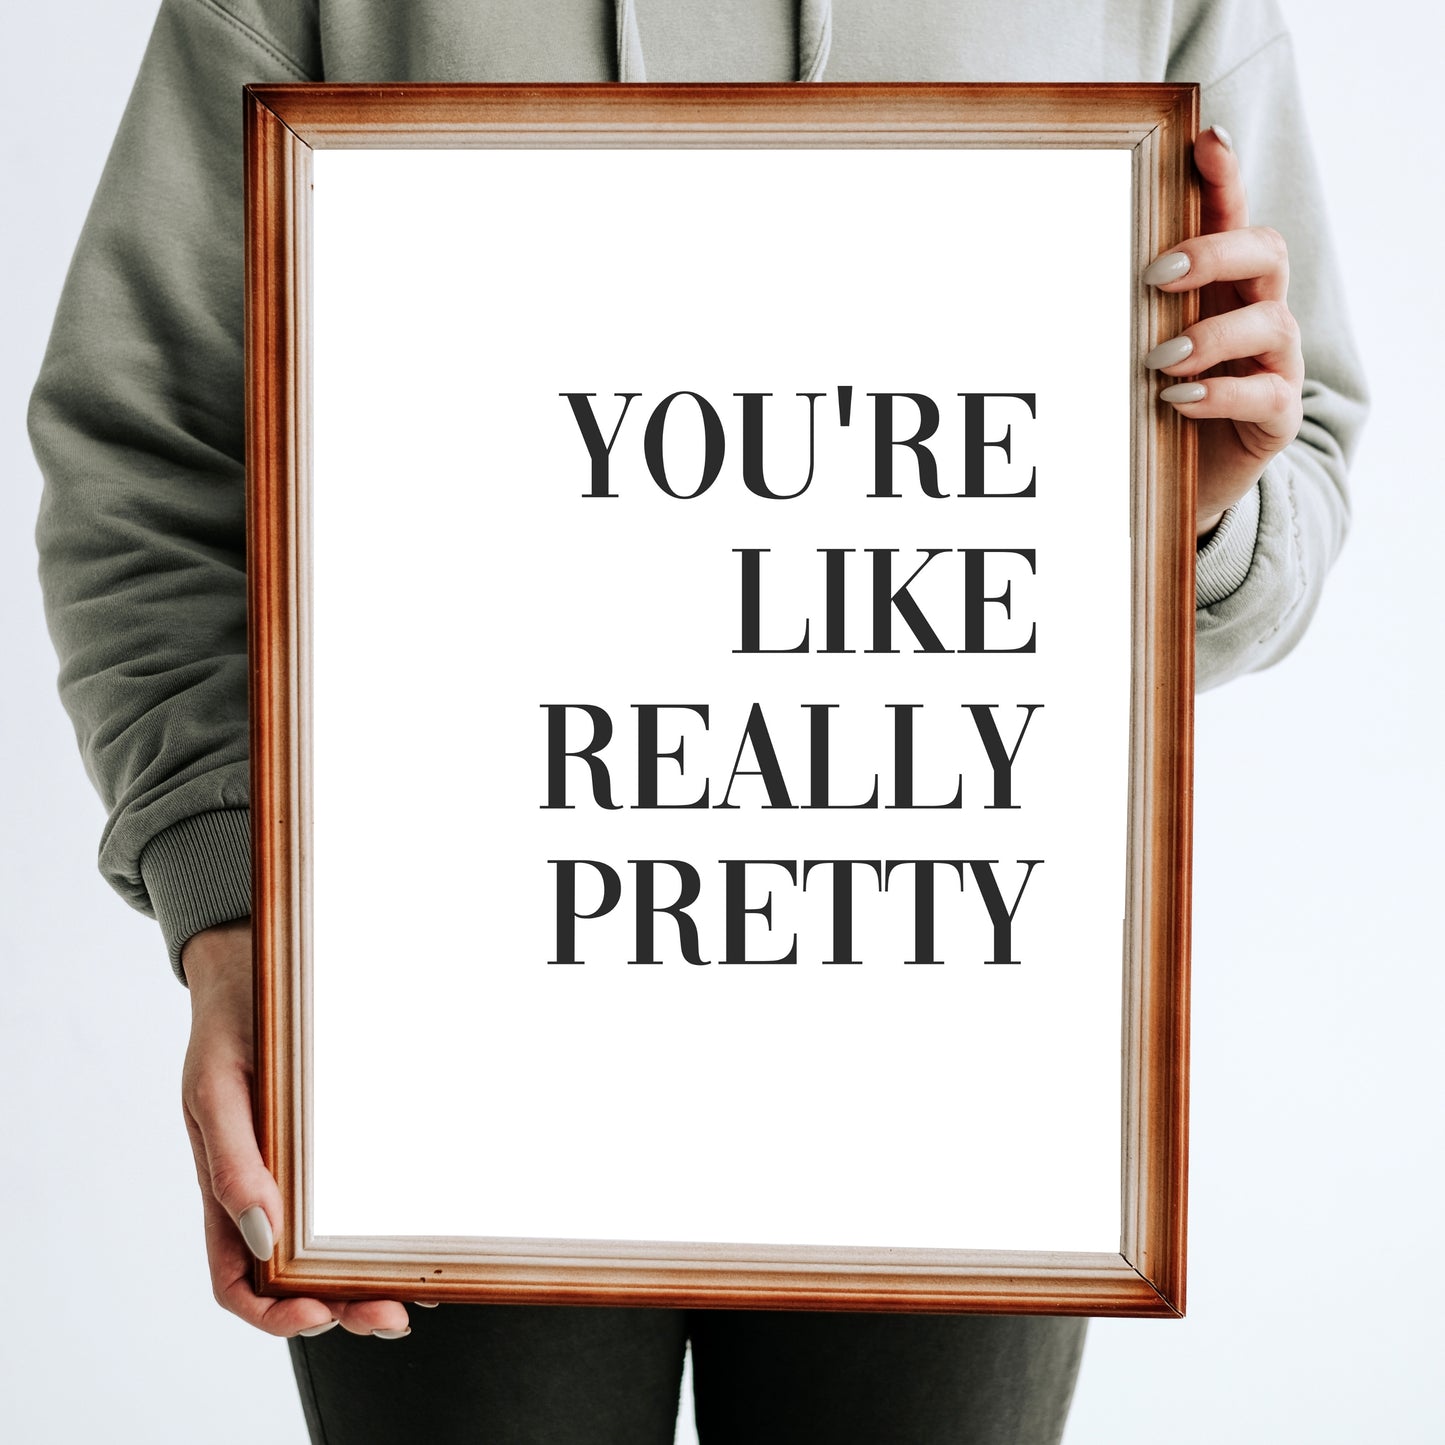 "You're Like Really Pretty" Movie Quote From 'Mean Girls,' Printable Art